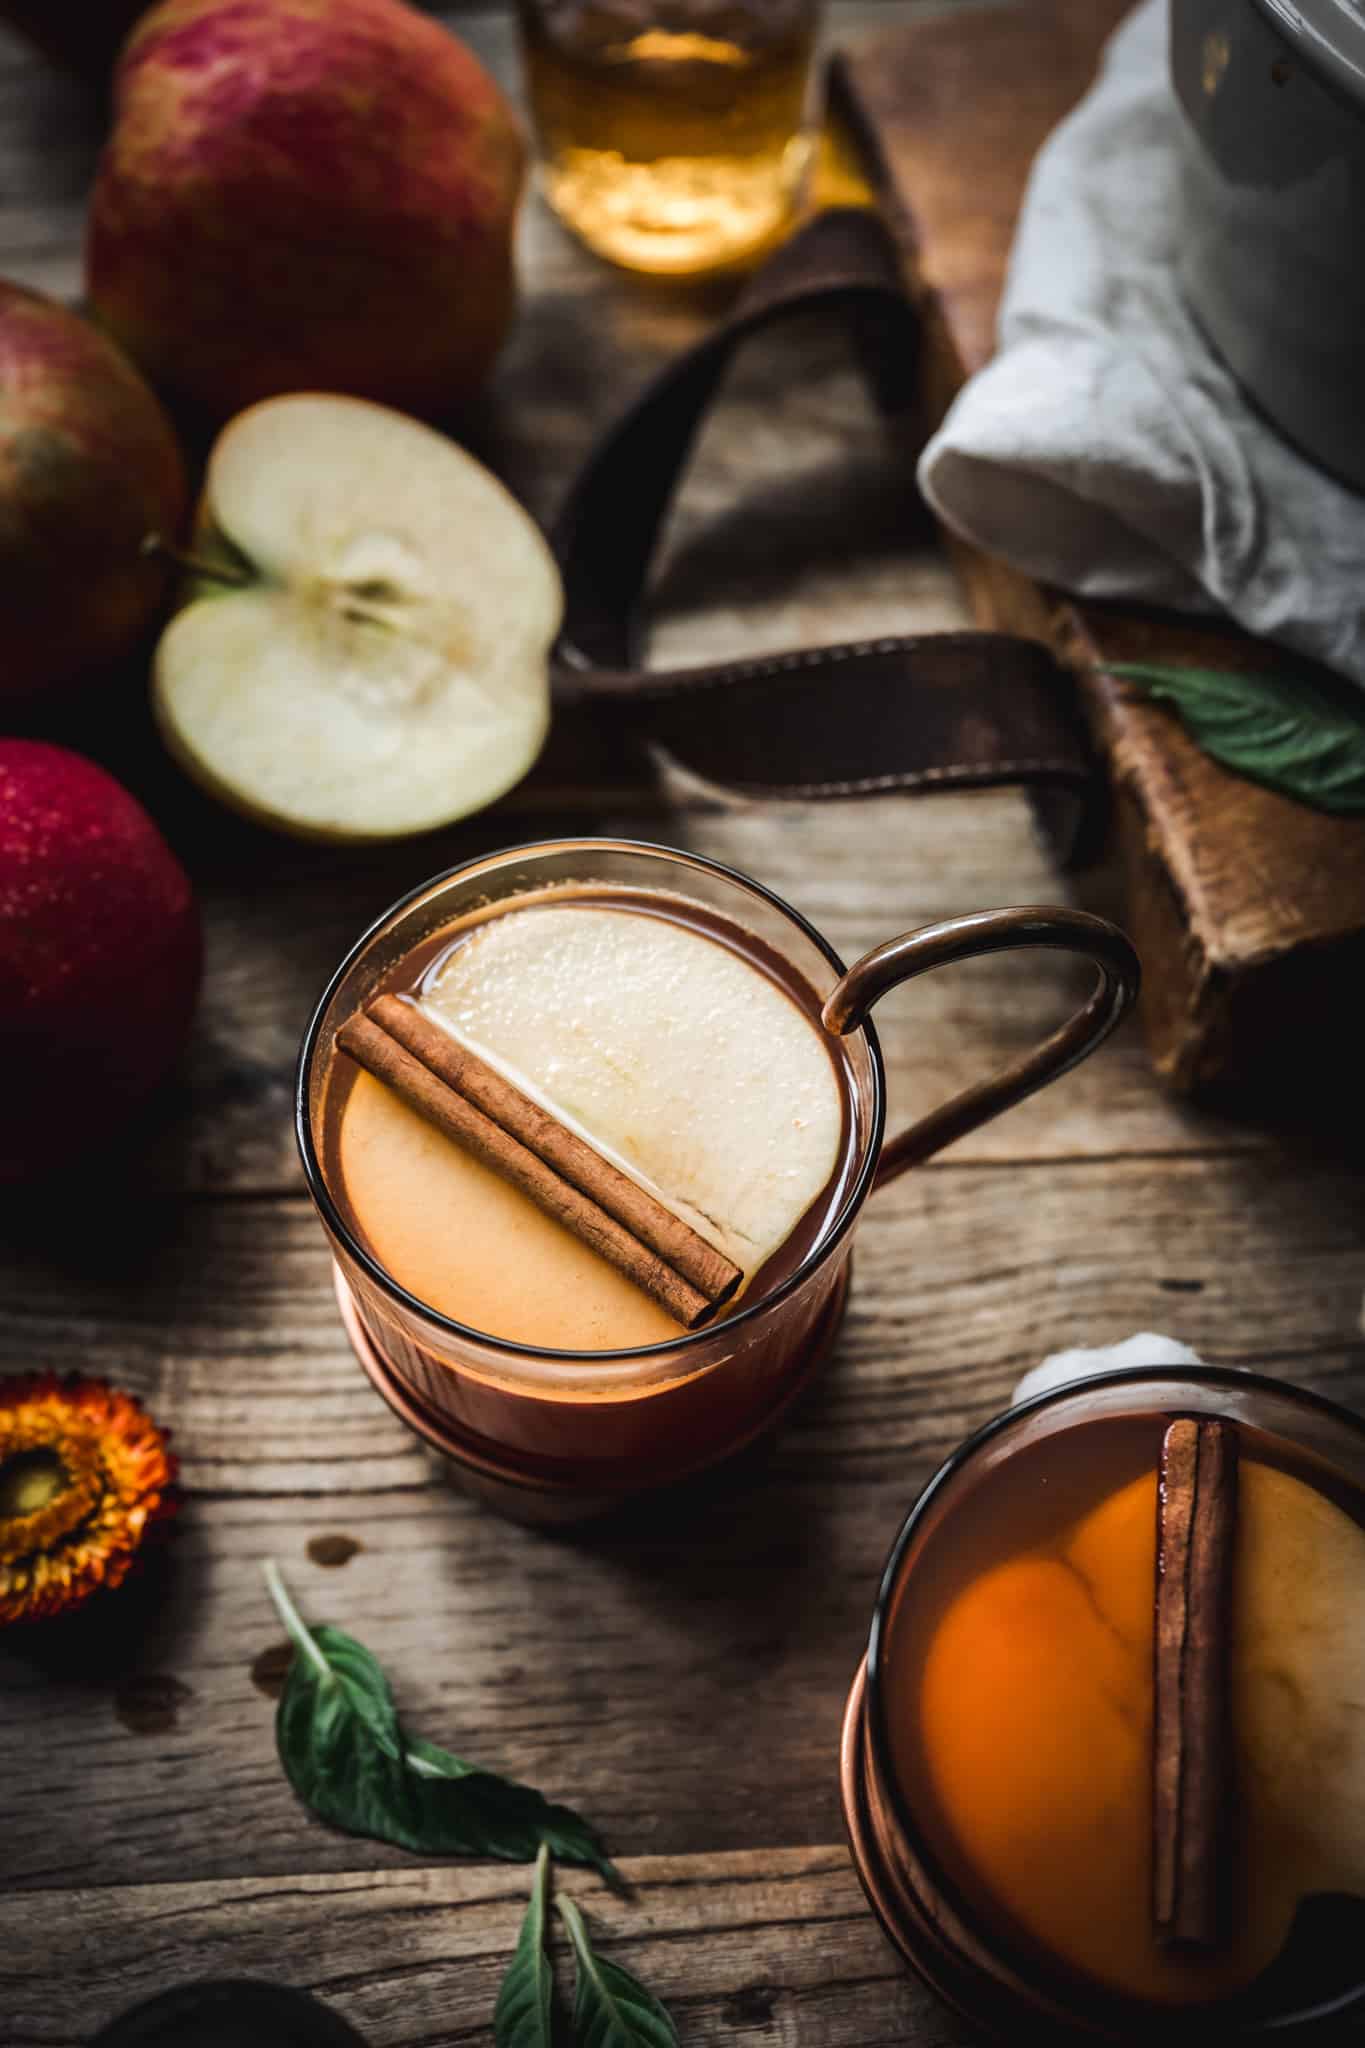 Overhead view of hot apple cider cocktail garnished with cinnamon stick on rustic wood background